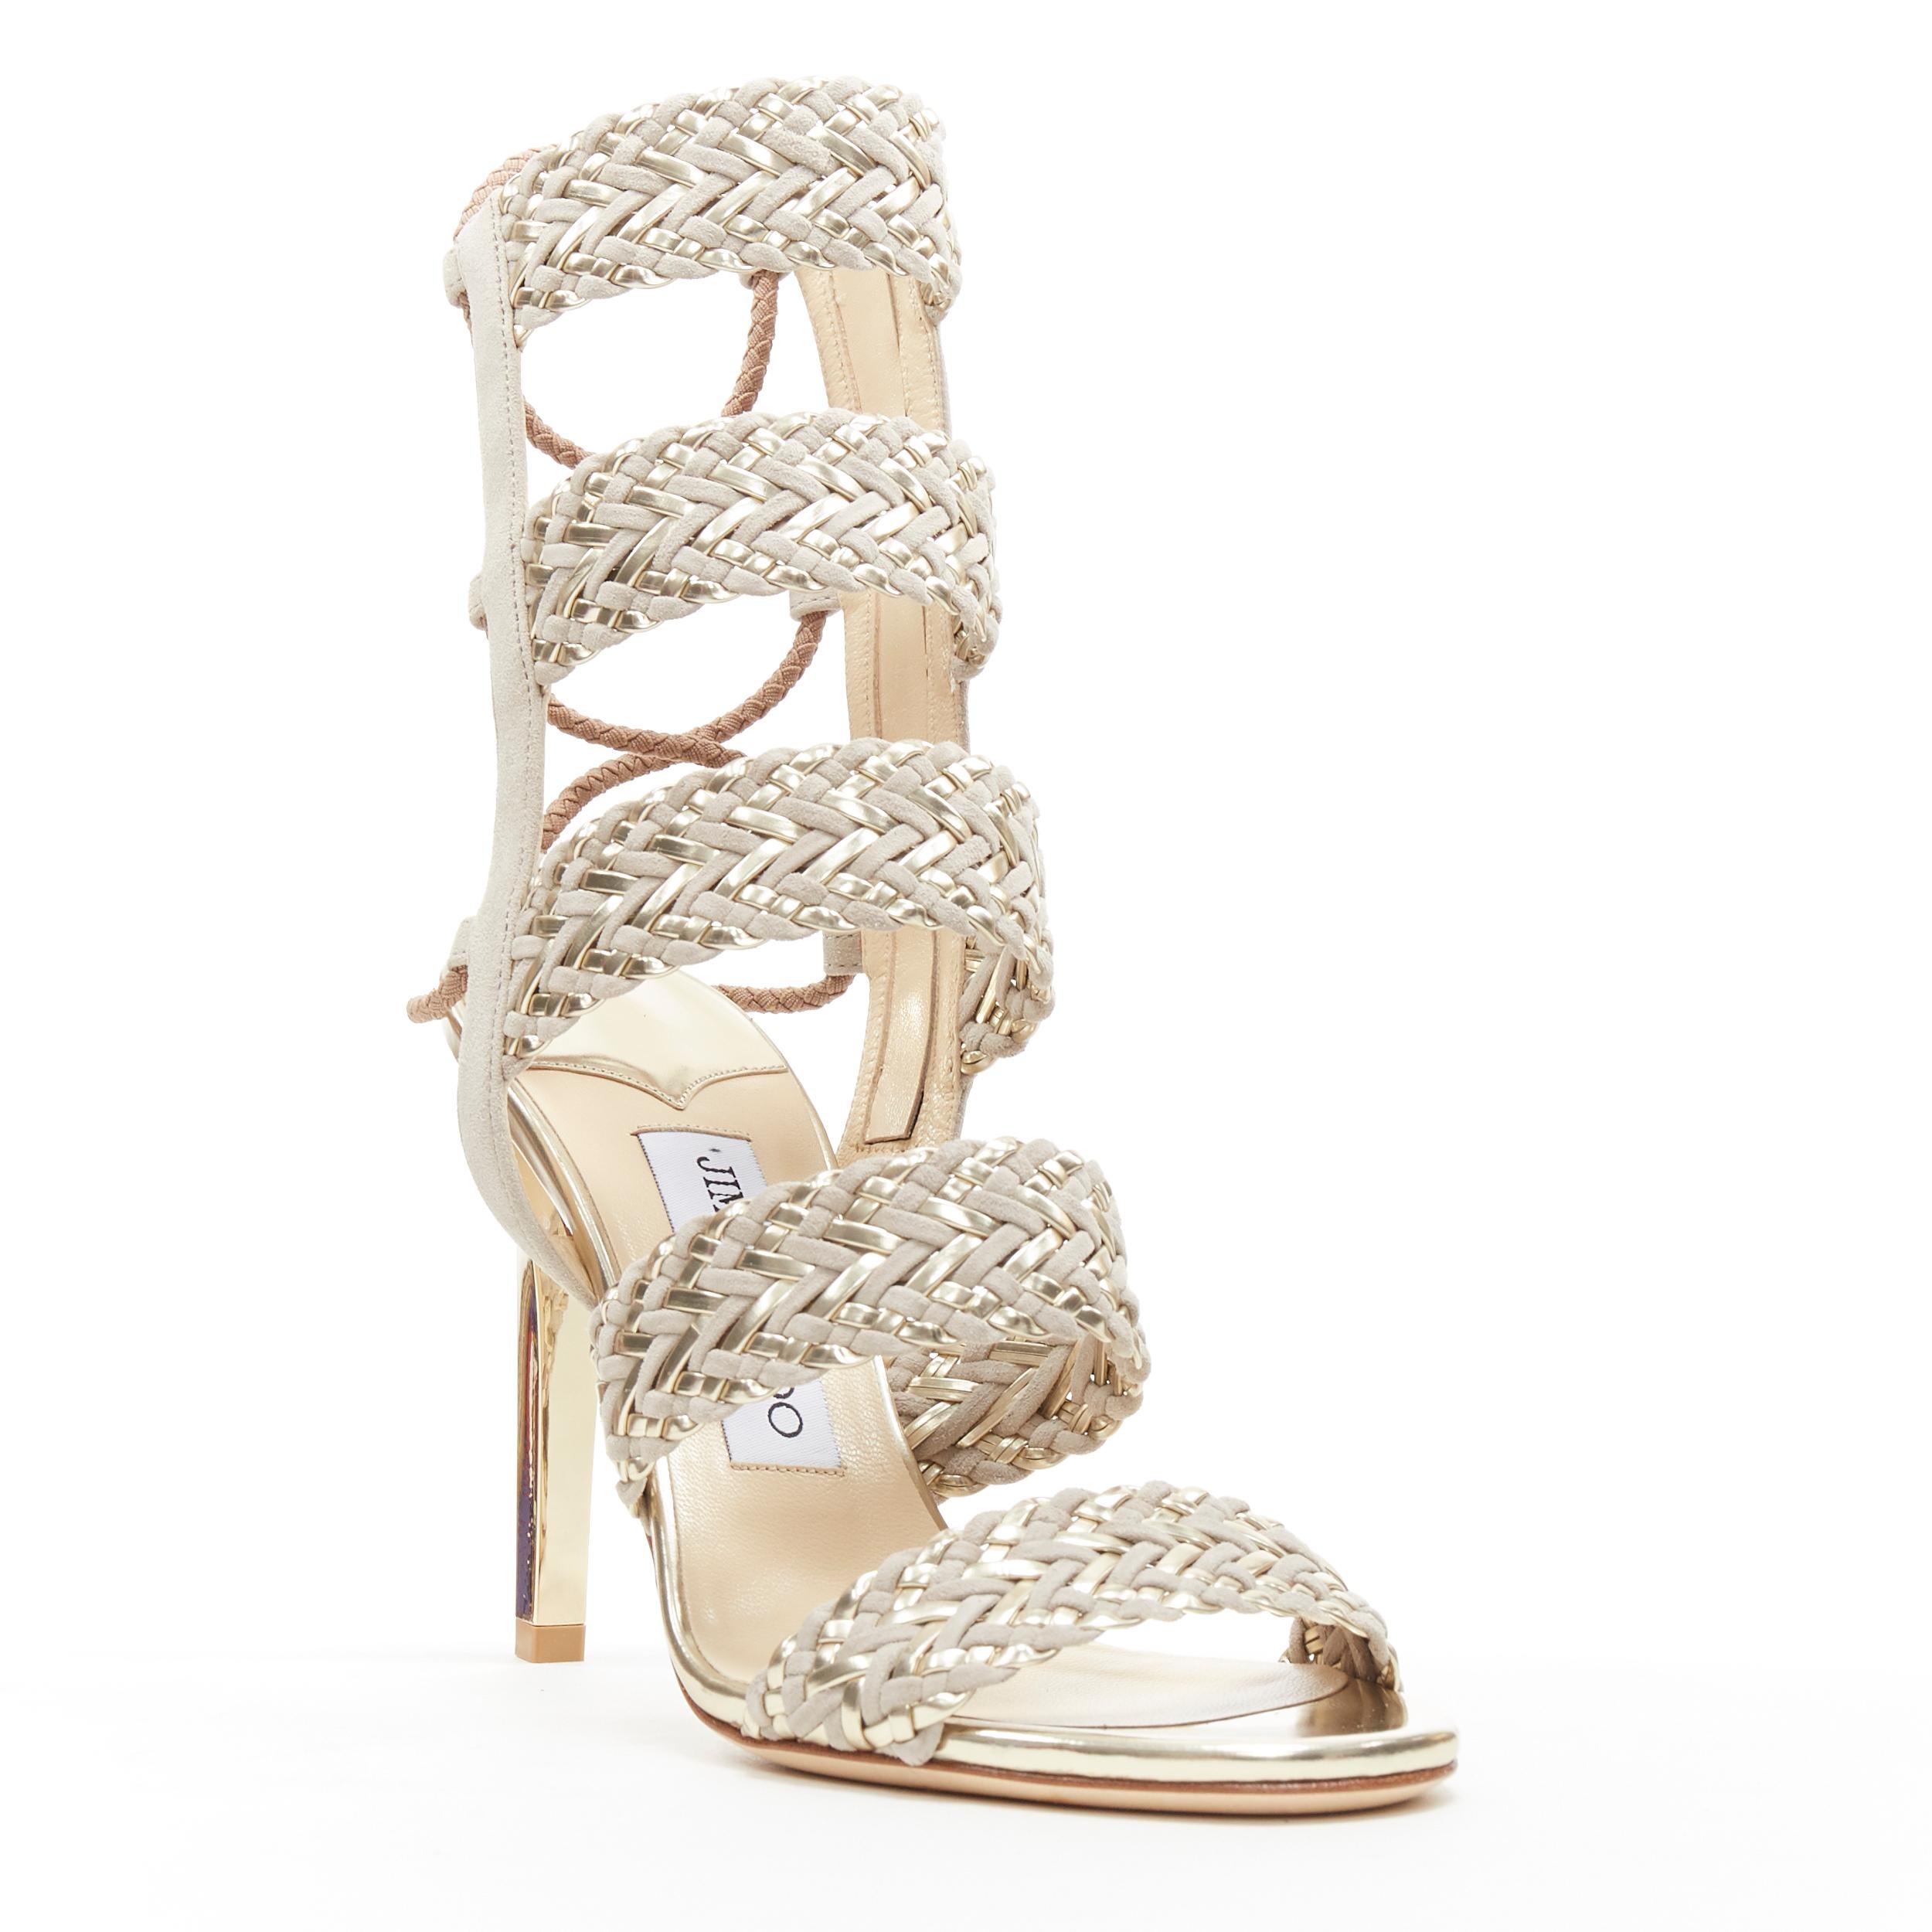 new JIMMY CHOO Lima 100 champagne gold grey suede woven gladiator sandal EU36
Brand: Jimmy Choo
Designer: Jimmy Choo
Model Name / Style: Lima 100
Material: Suede
Color: Grey
Pattern: Solid
Closure: Zip
Extra Detail: Light grey suede with champagne